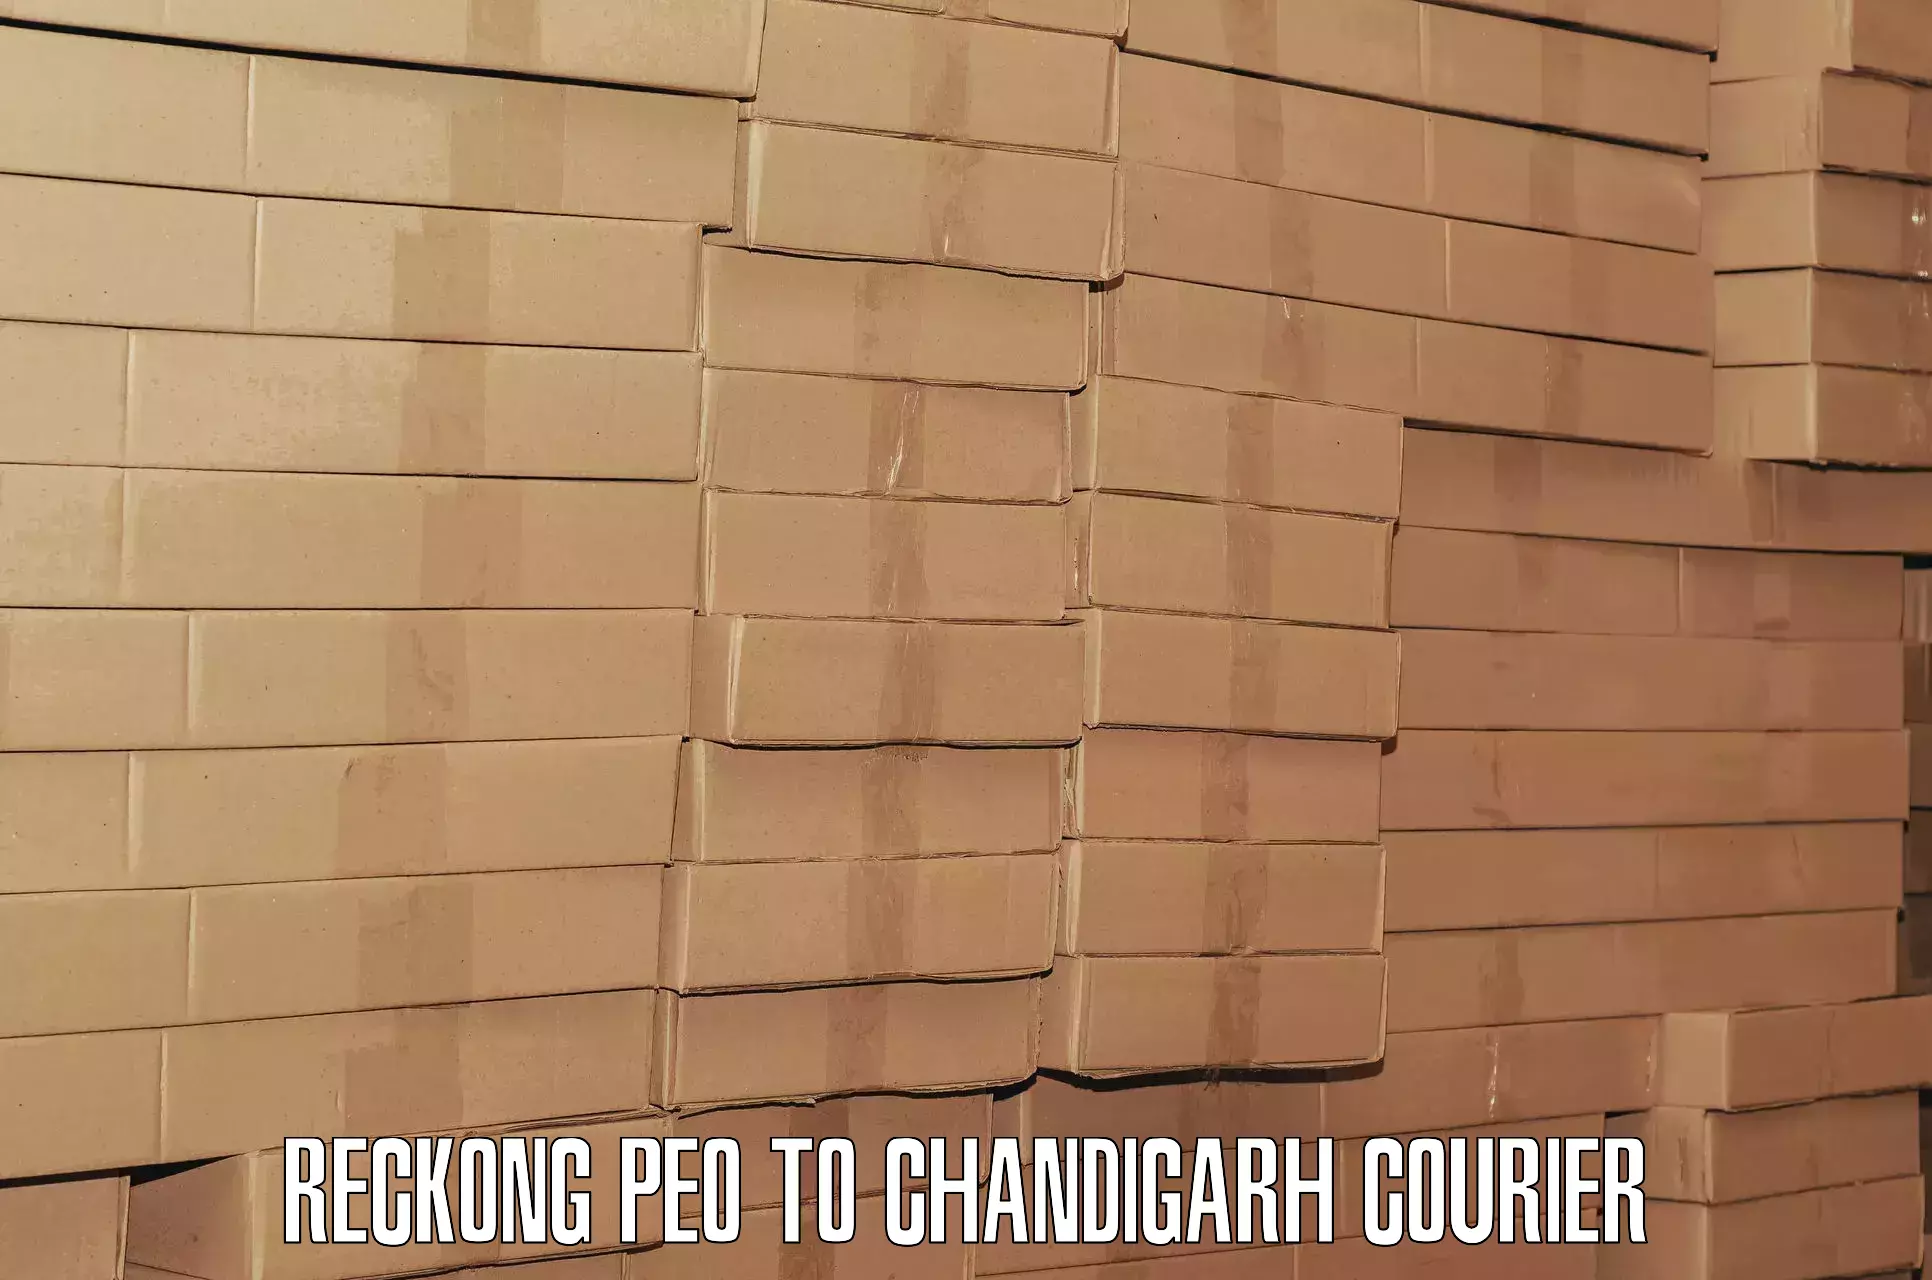 Emergency baggage service Reckong Peo to Chandigarh